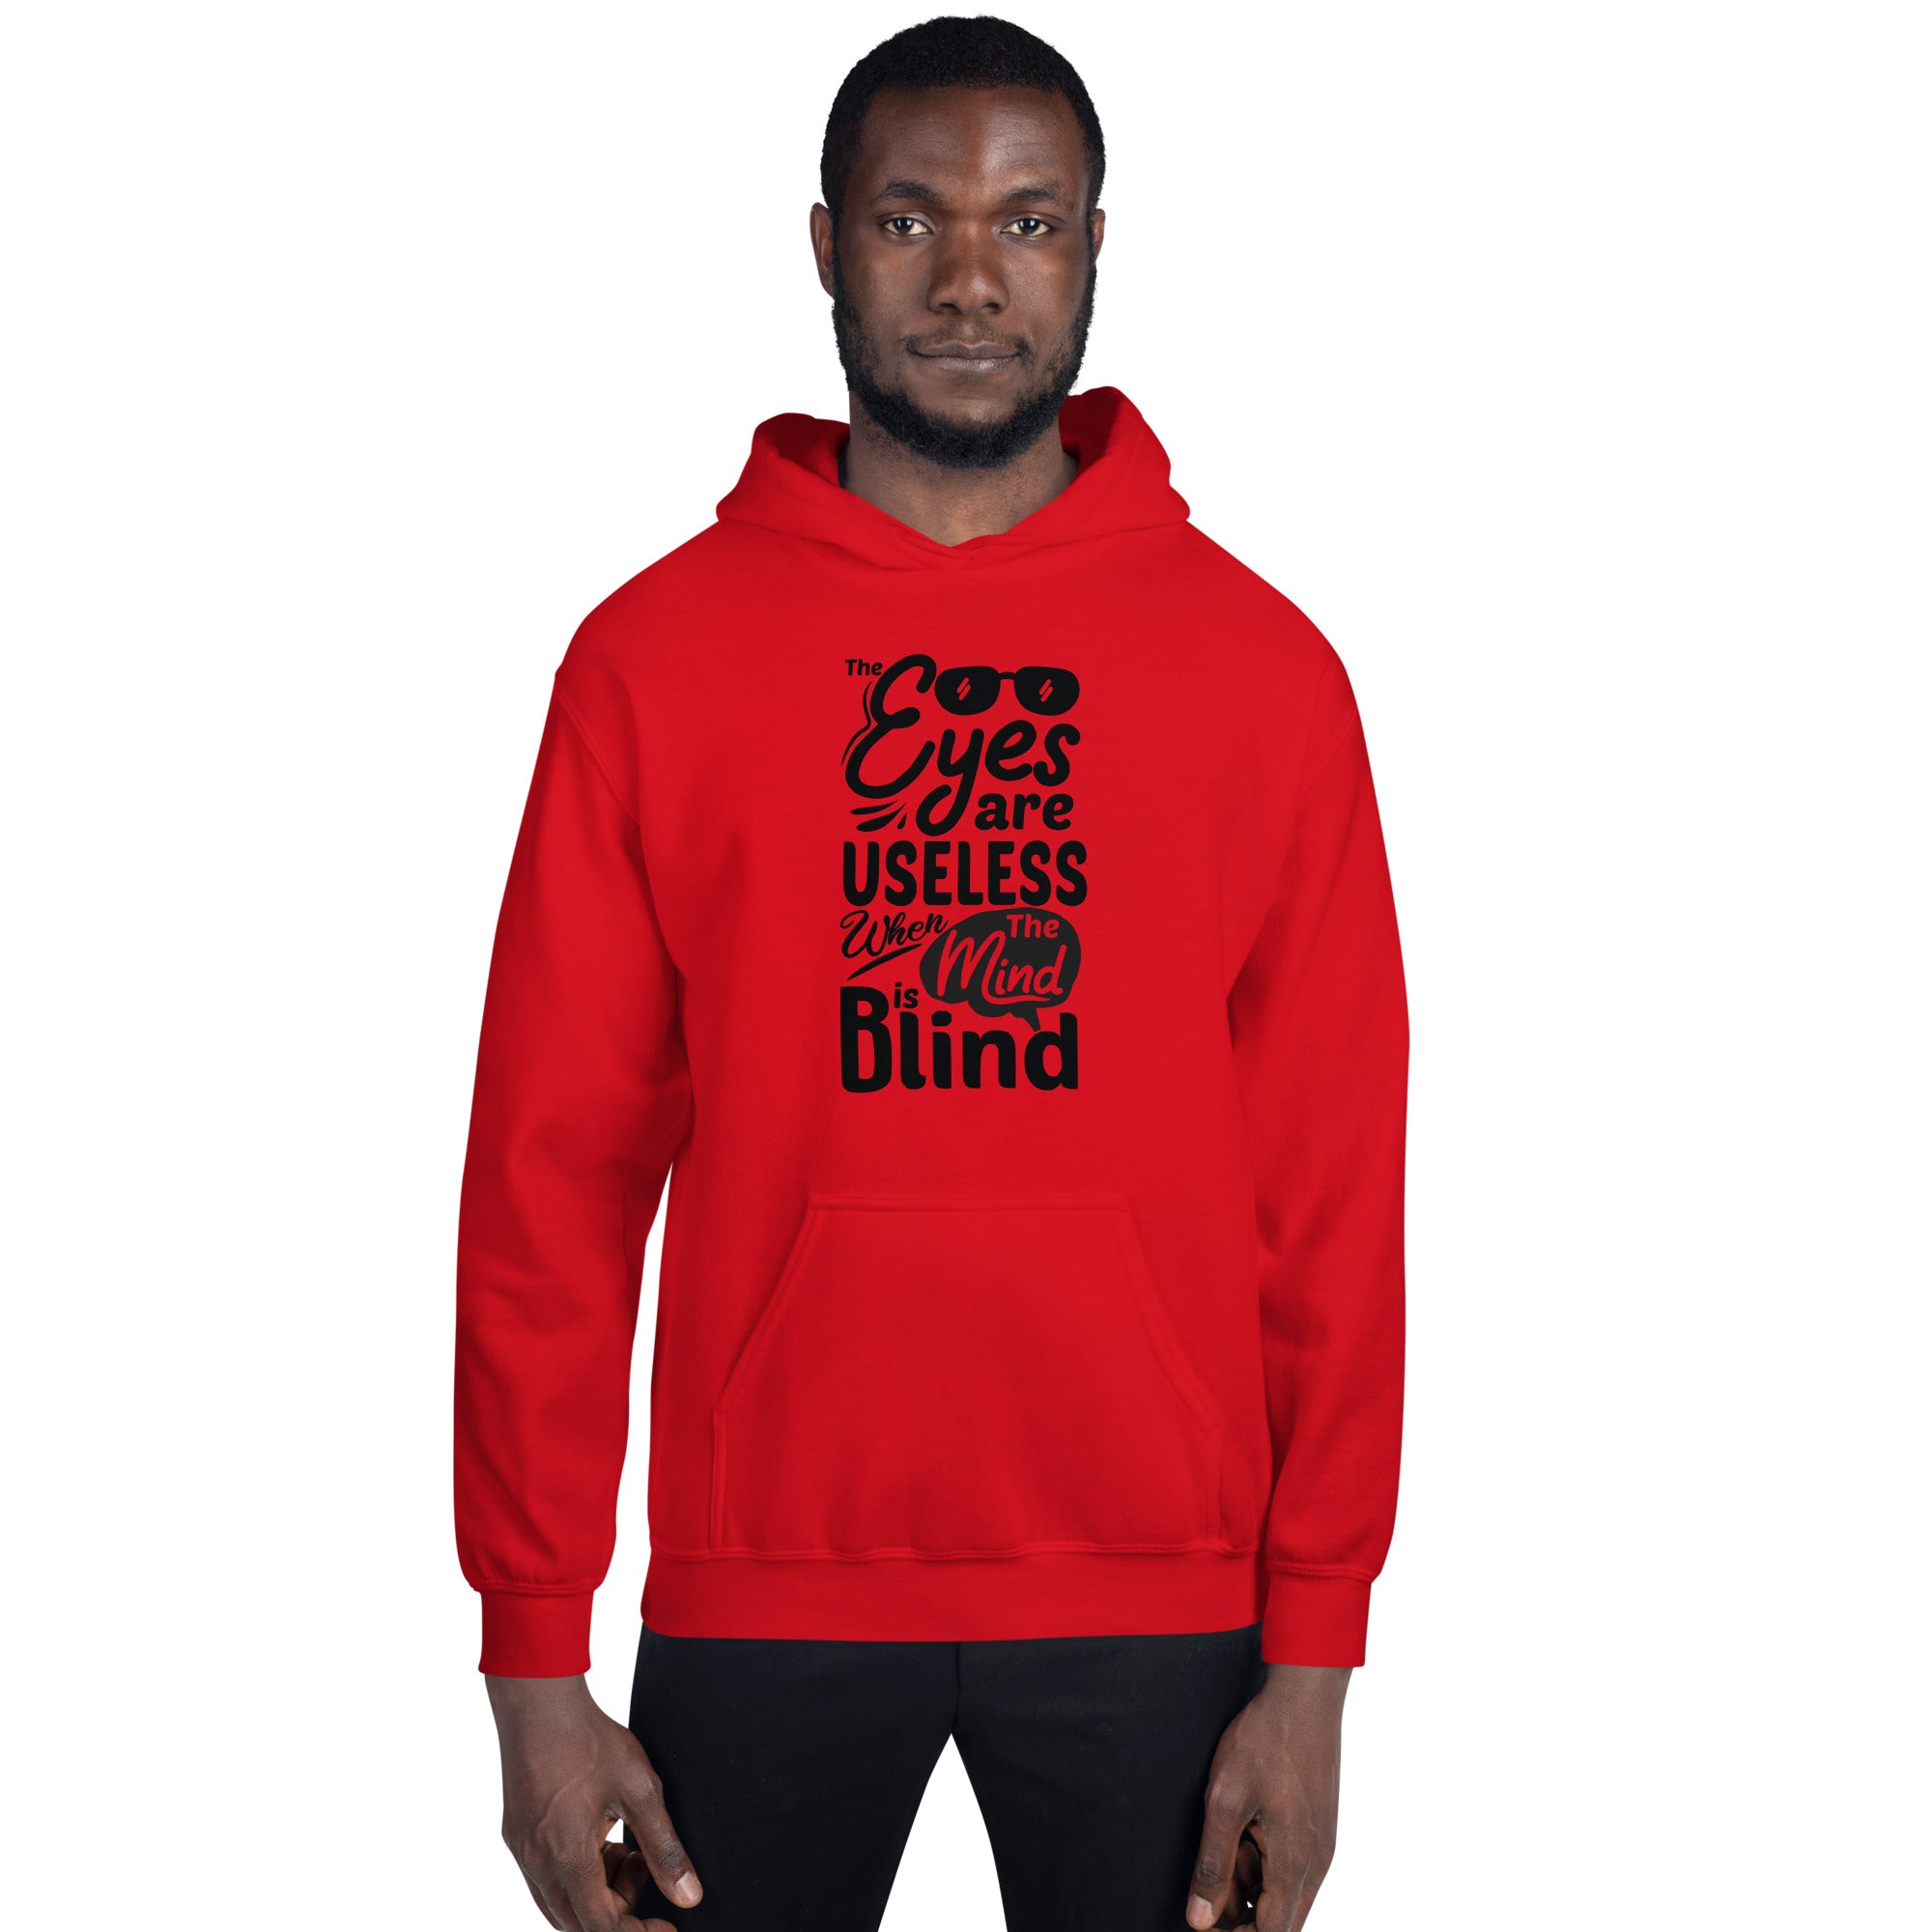 Eyes Are Useless When The Mind Is Blind - Unisex Hoodie